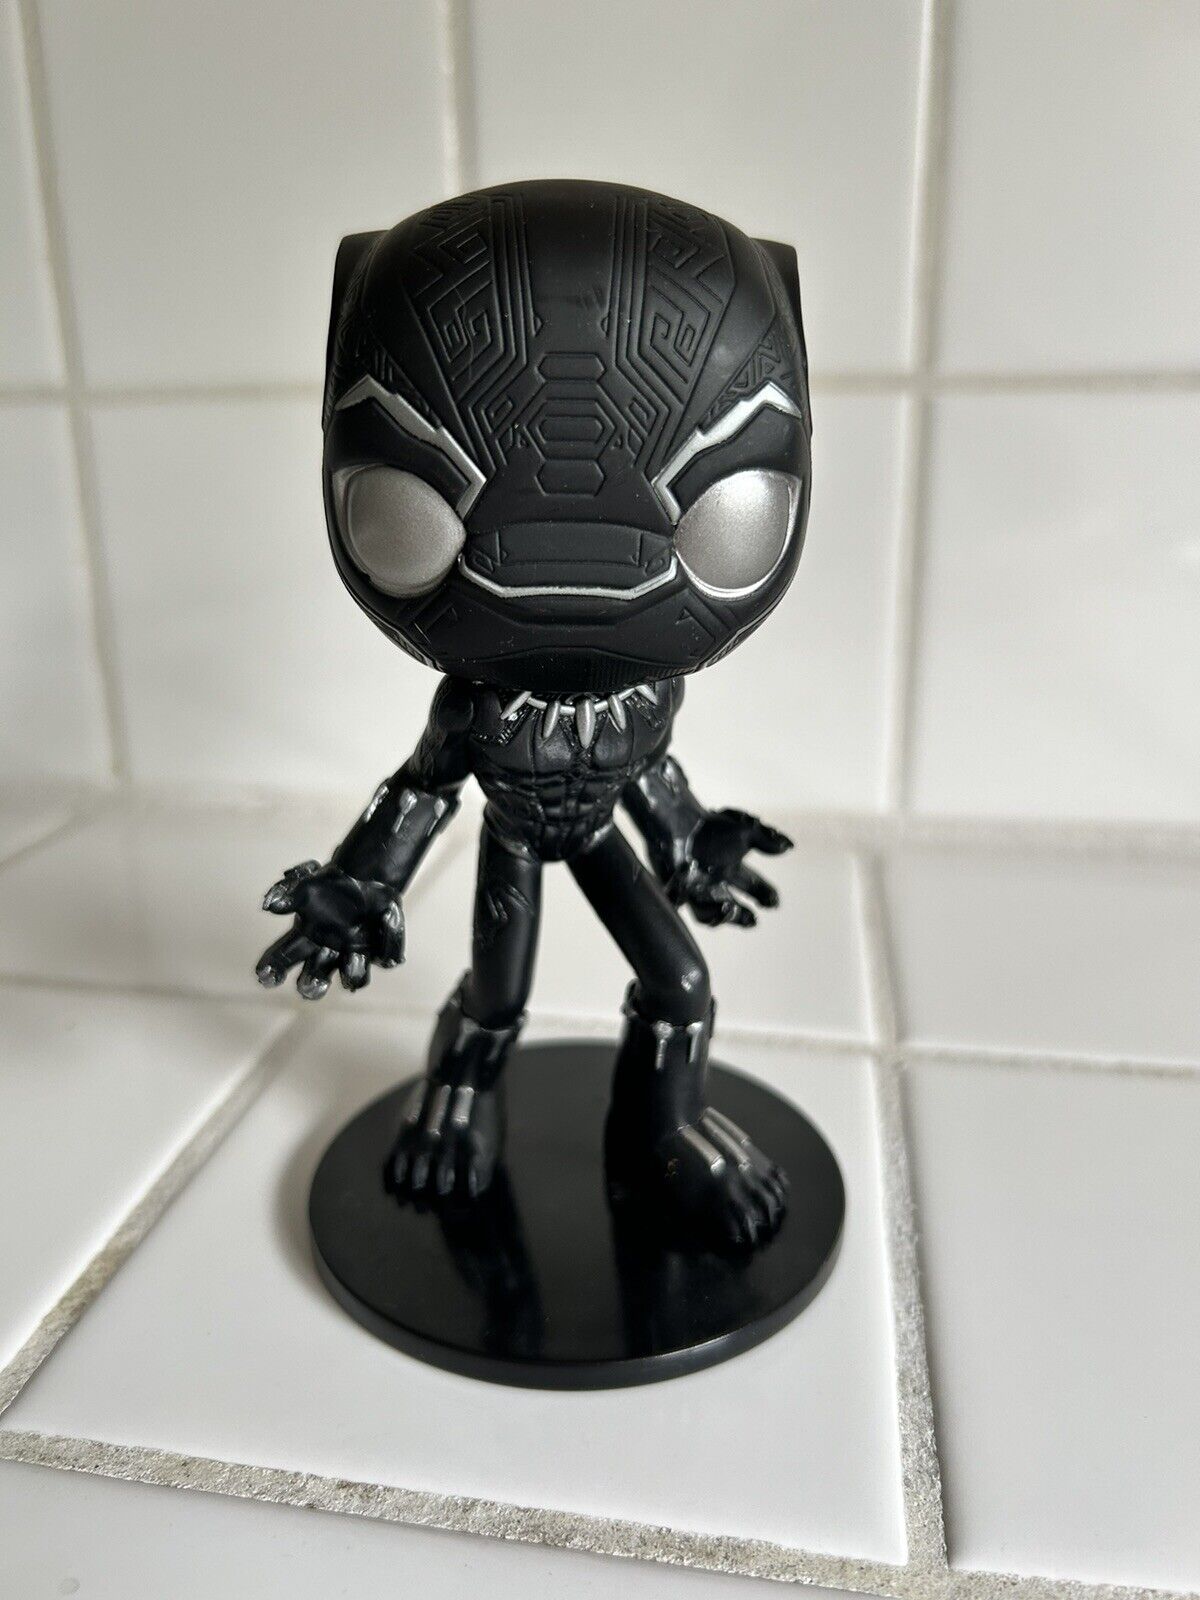 Funko Wobblers Marvel Black Panther bobble-head, MCC Collector Corps exclusive